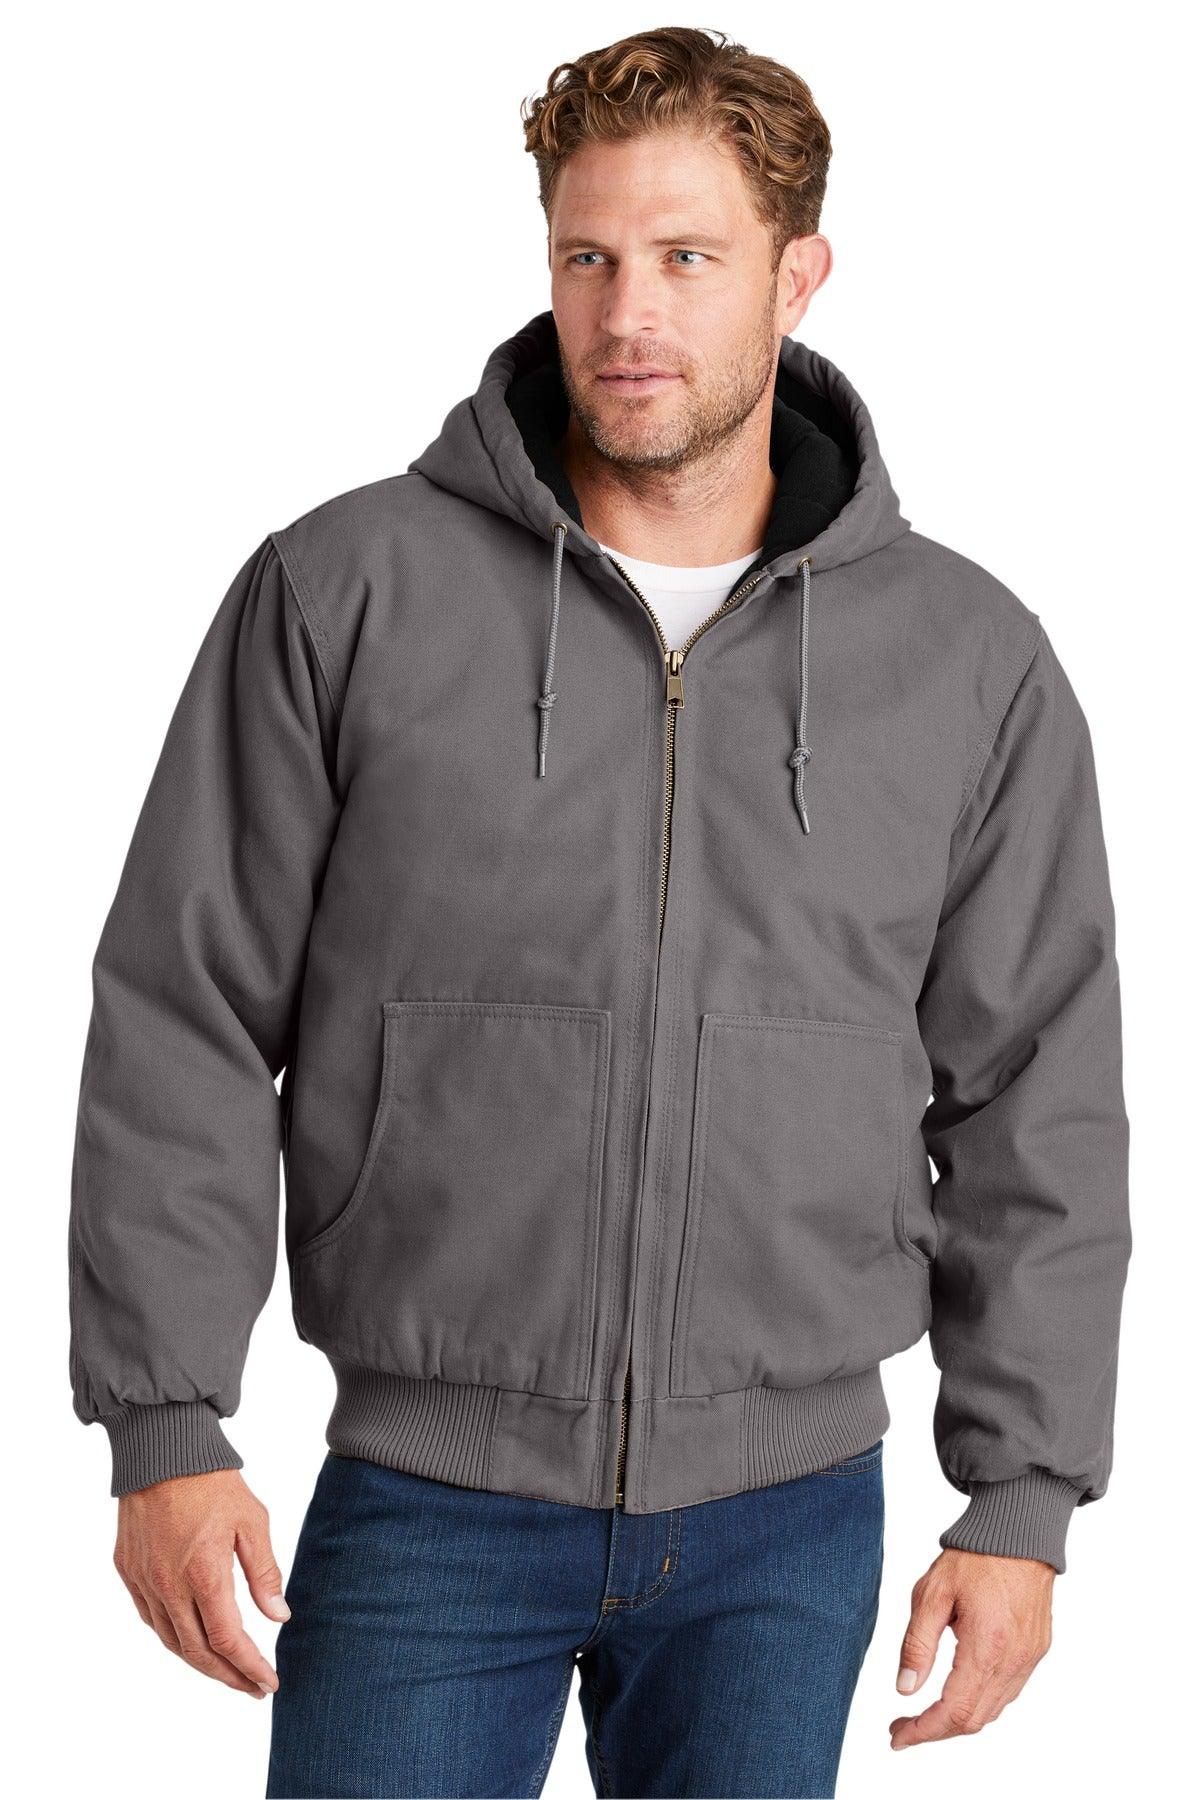 CornerStone Washed Duck Cloth Insulated Hooded Work Jacket. CSJ41 - Dresses Max